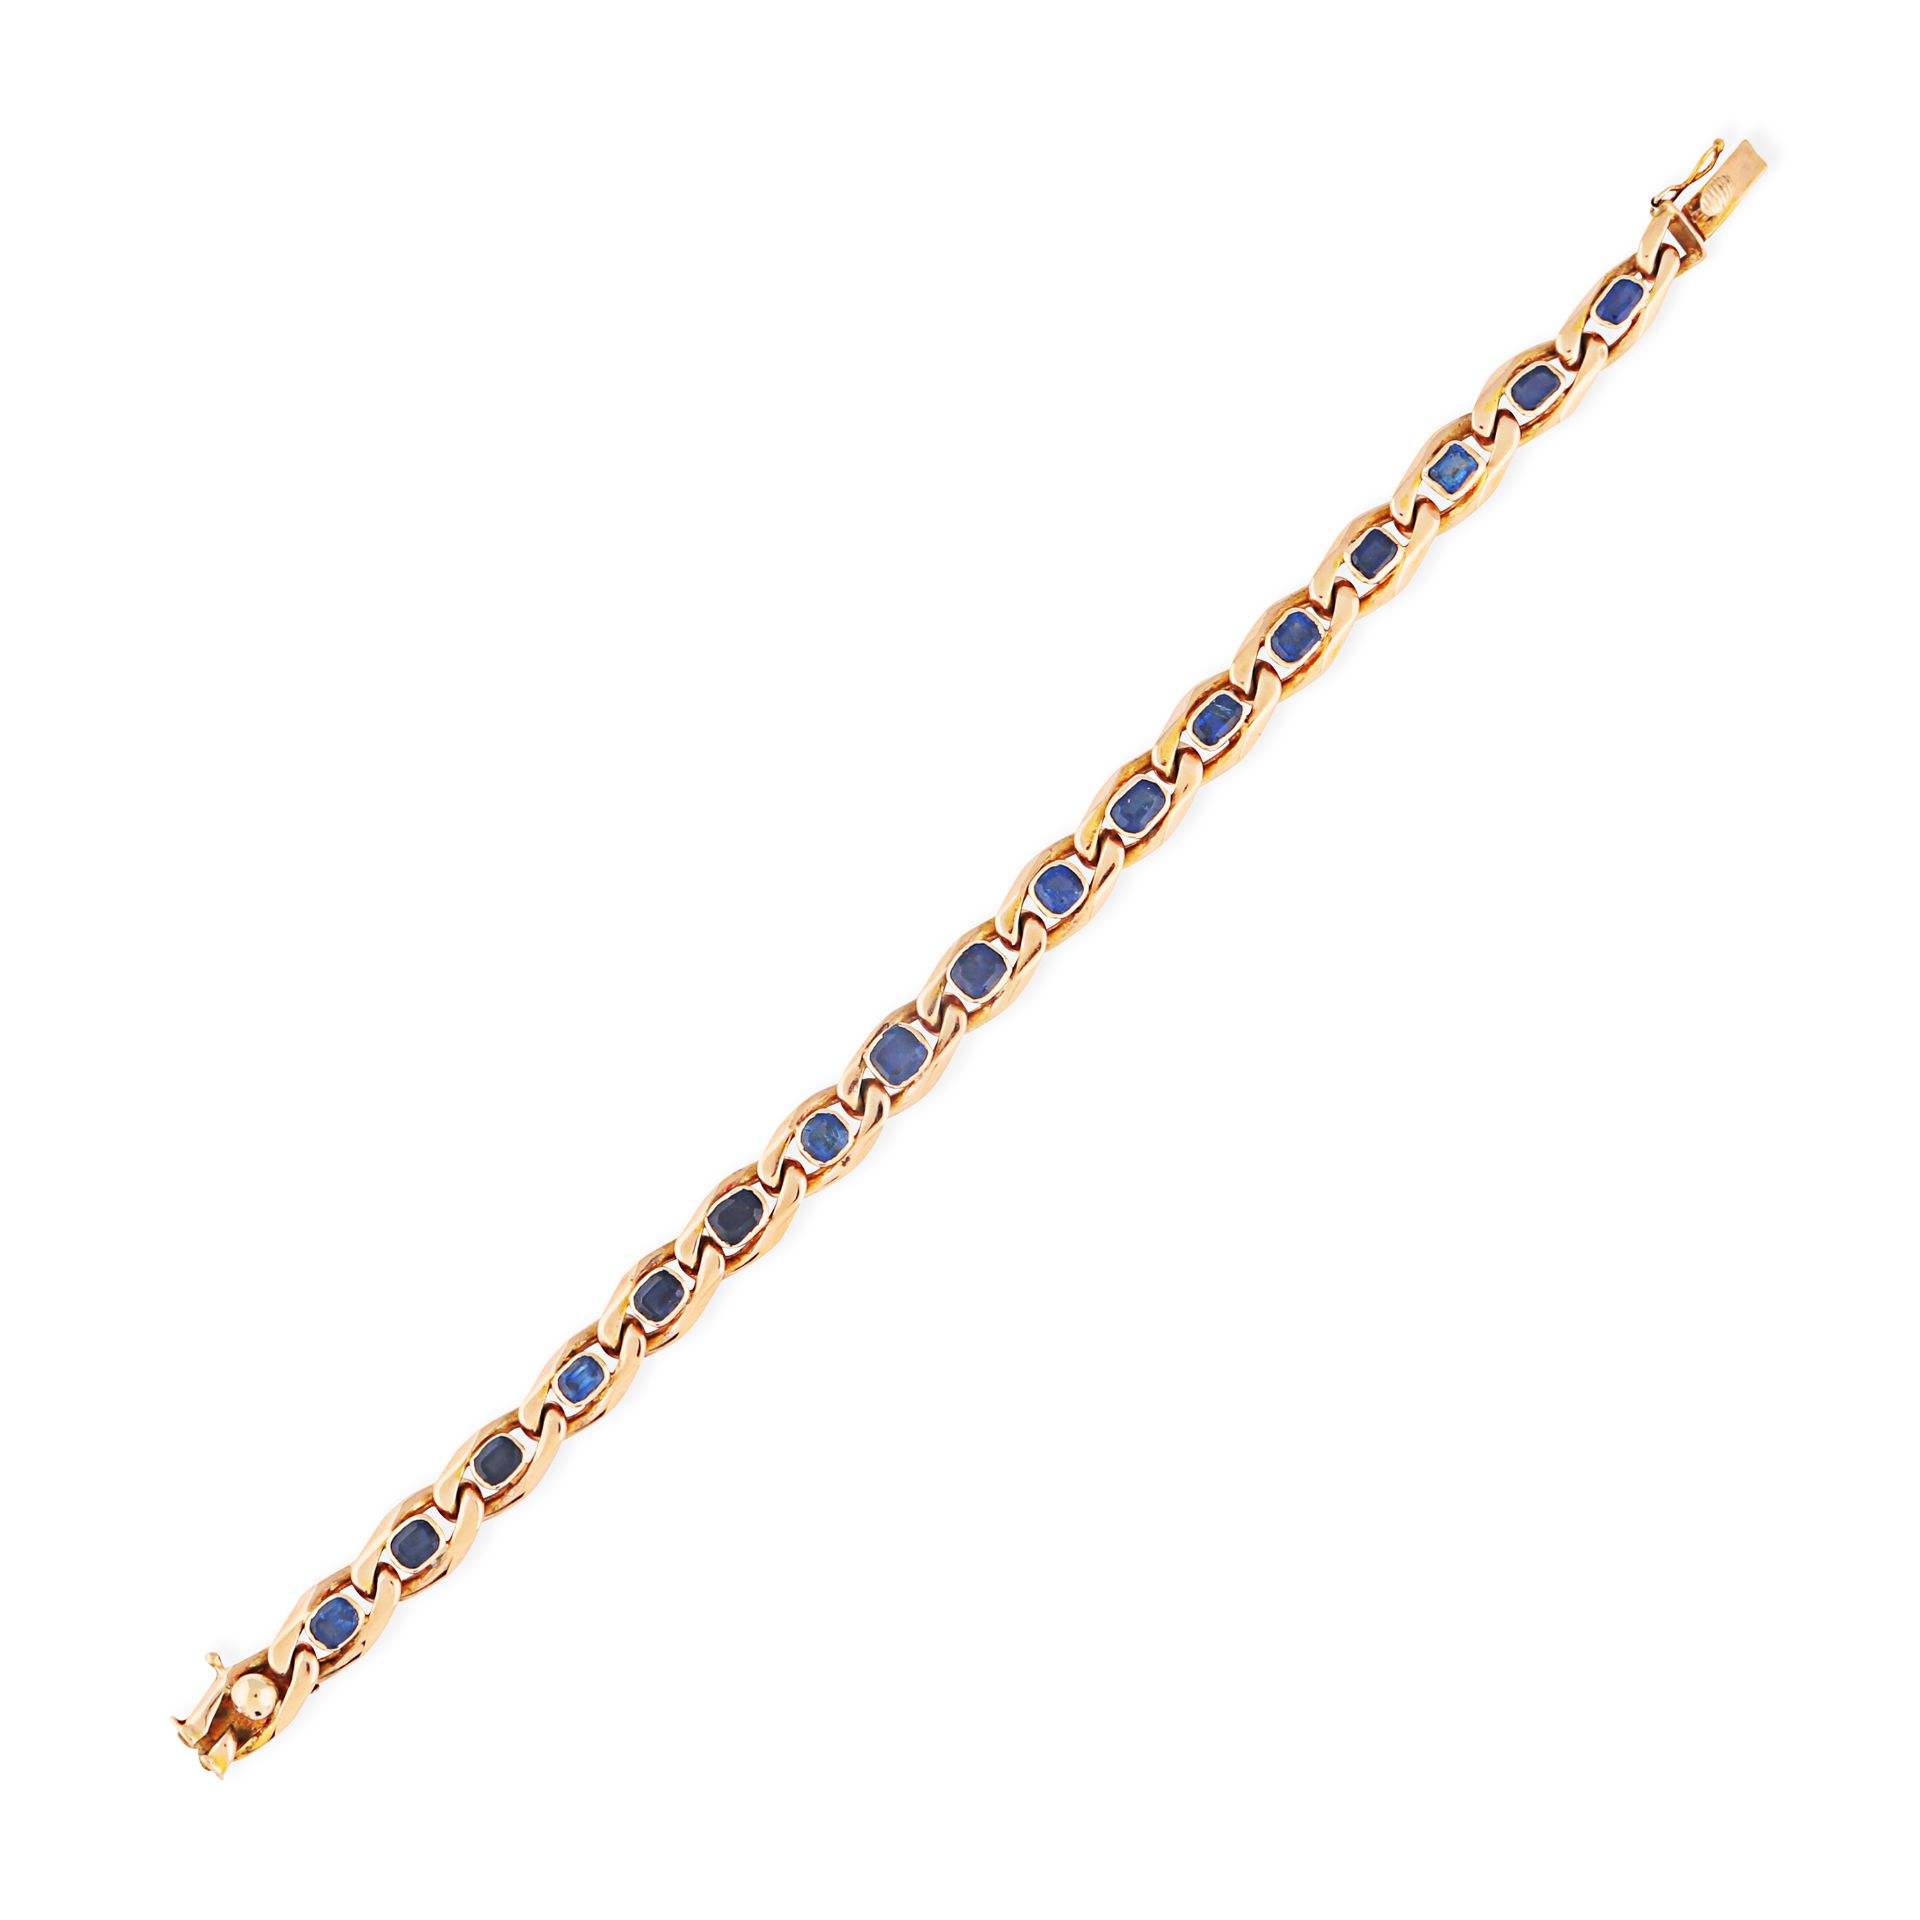 A SAPPHIRE CURB LINK BRACELET in yellow gold, comprising a row of elongated curb links, each set ... - Image 2 of 2